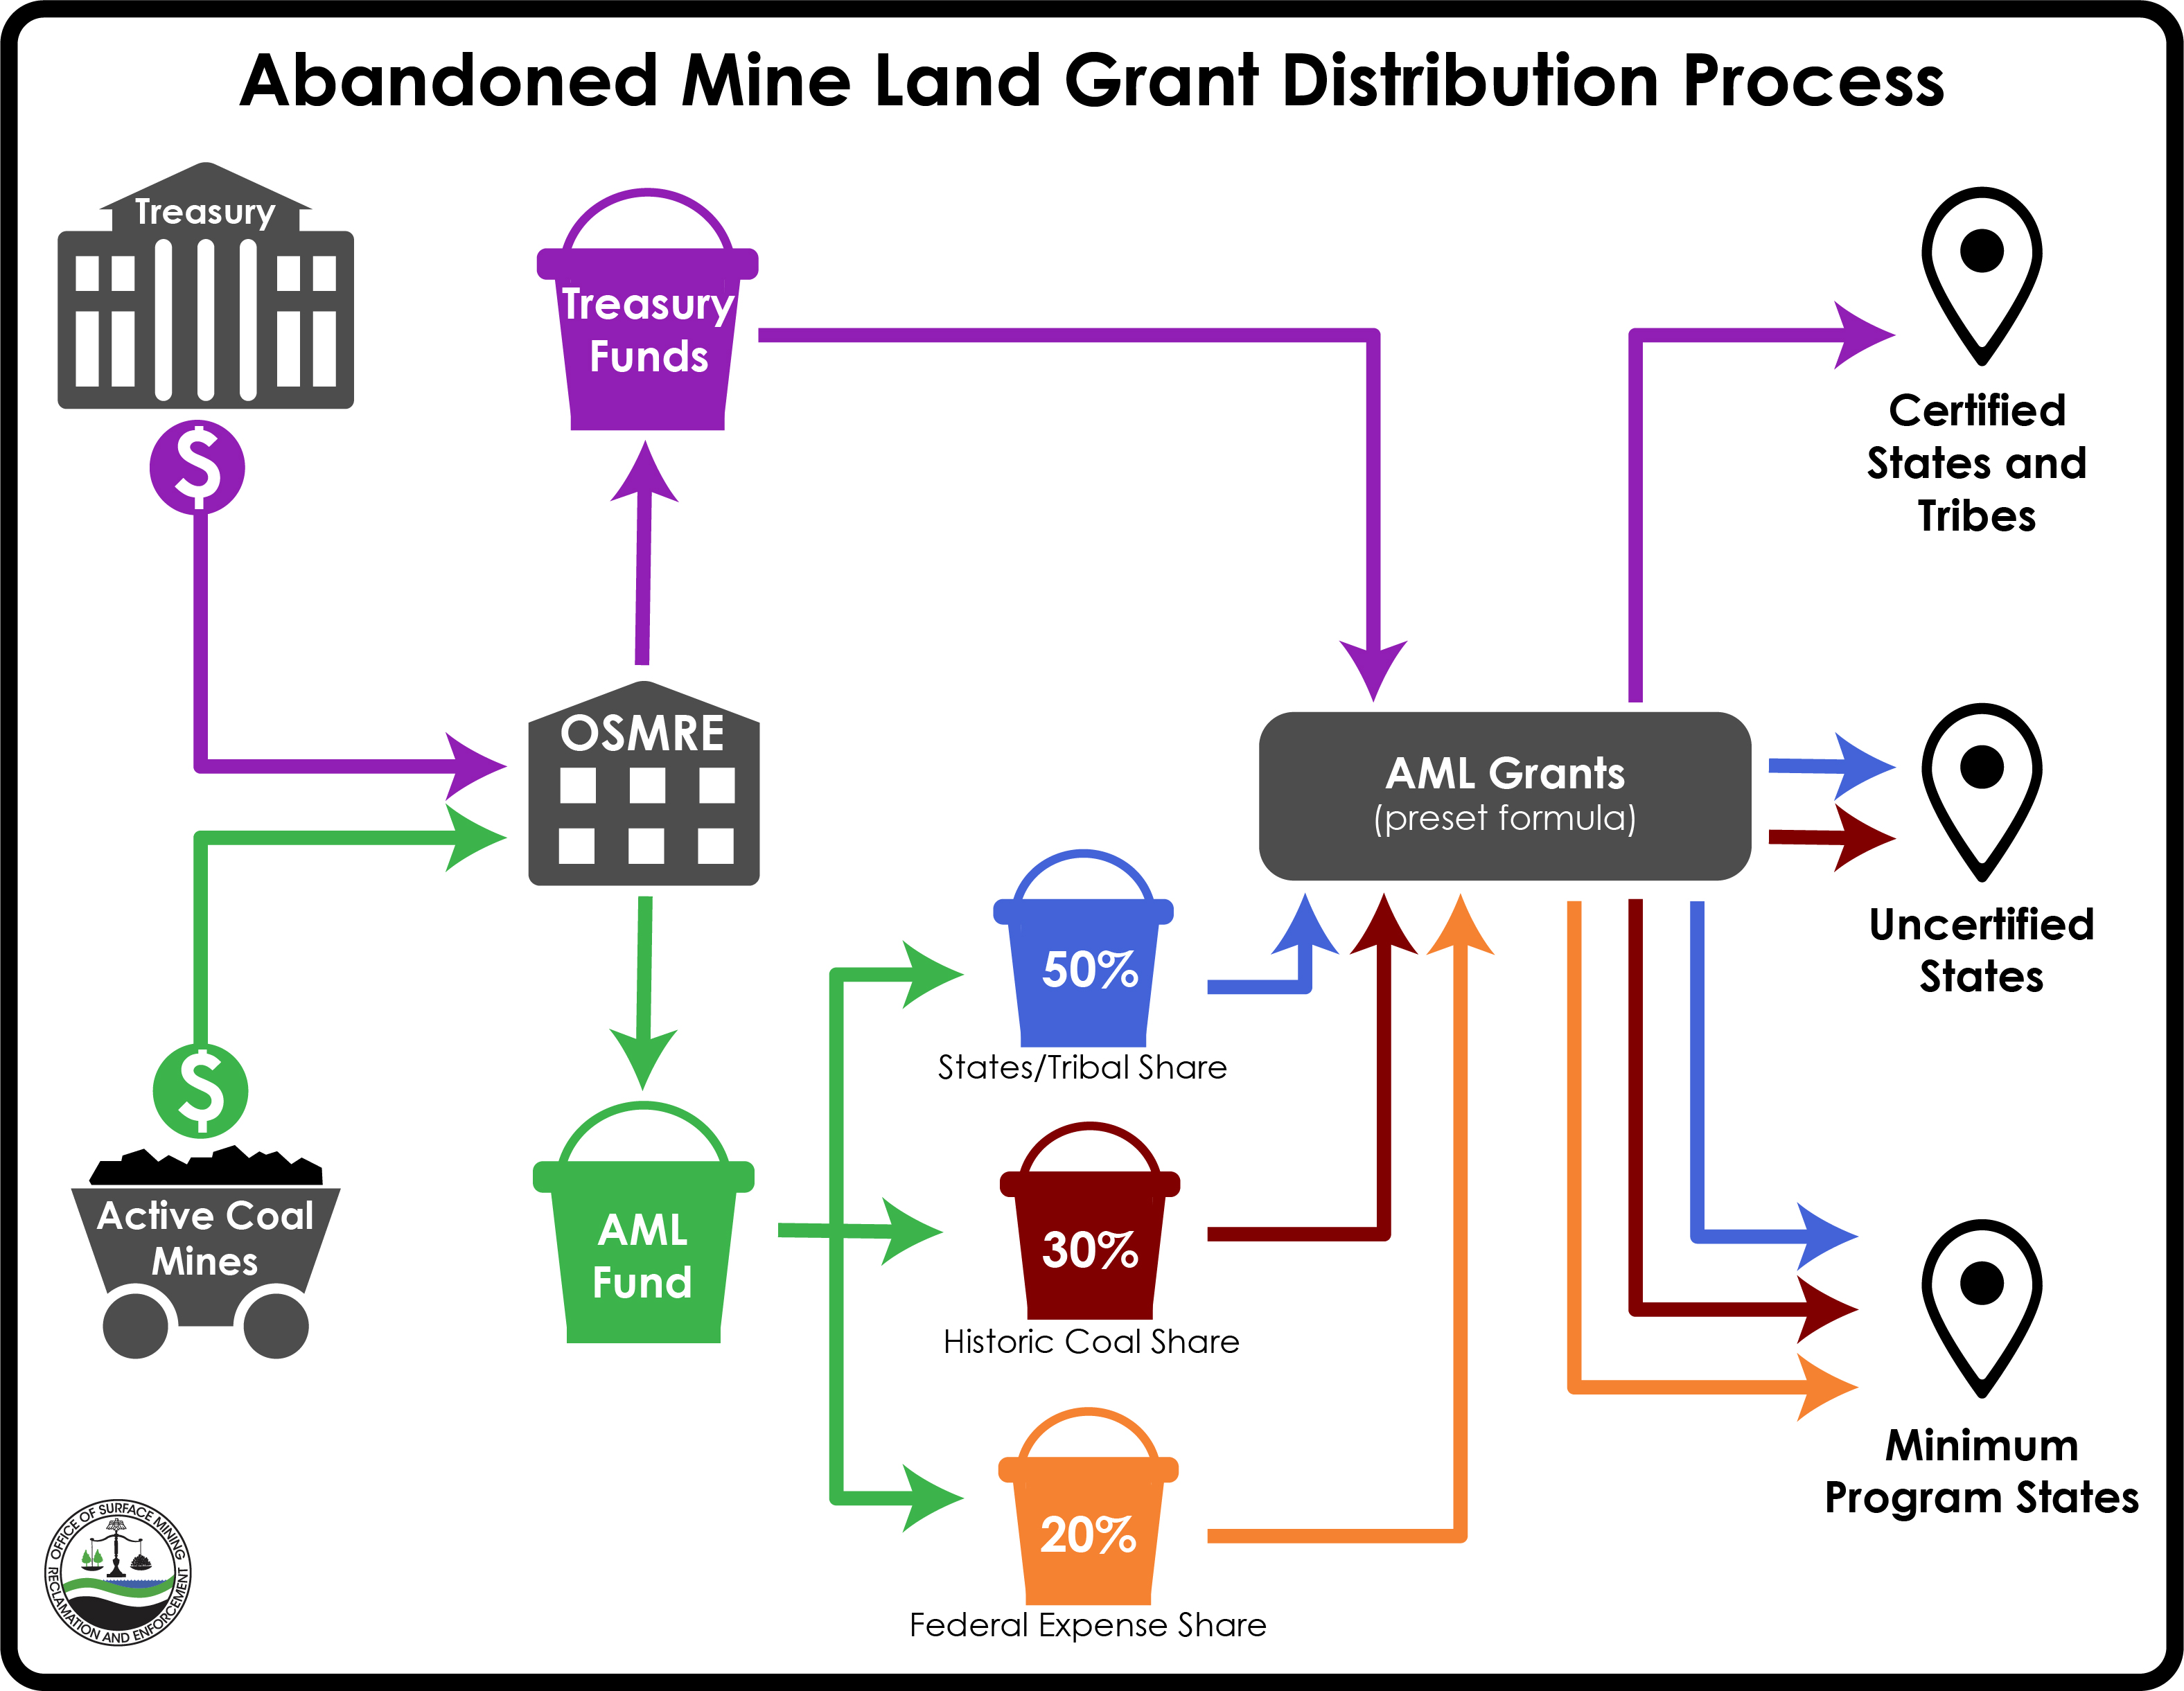 Fees collected from active coal mines are managed by OSMRE and held in the AML Fund. Within the AML Fund, monies are classified as State/Tribal Share (50%), Historic Coal Share (30%), and Federal Expense Share (20%). The AML Fund is distributed as grants using preset formulas to Uncertified and Minimum Program States. Both Uncertified and Minimum Program states receive grants from the State/Tribal Share and Historic Coal Share. Additional funds are provided to minimum program states from the Federal Expense Share to ensure a minimum grant of $3 million each year. Additionally, OSMRE manages funds provided from the US Treasury. These funds are distributed though the AML grant process to Certified States and Tribes. 